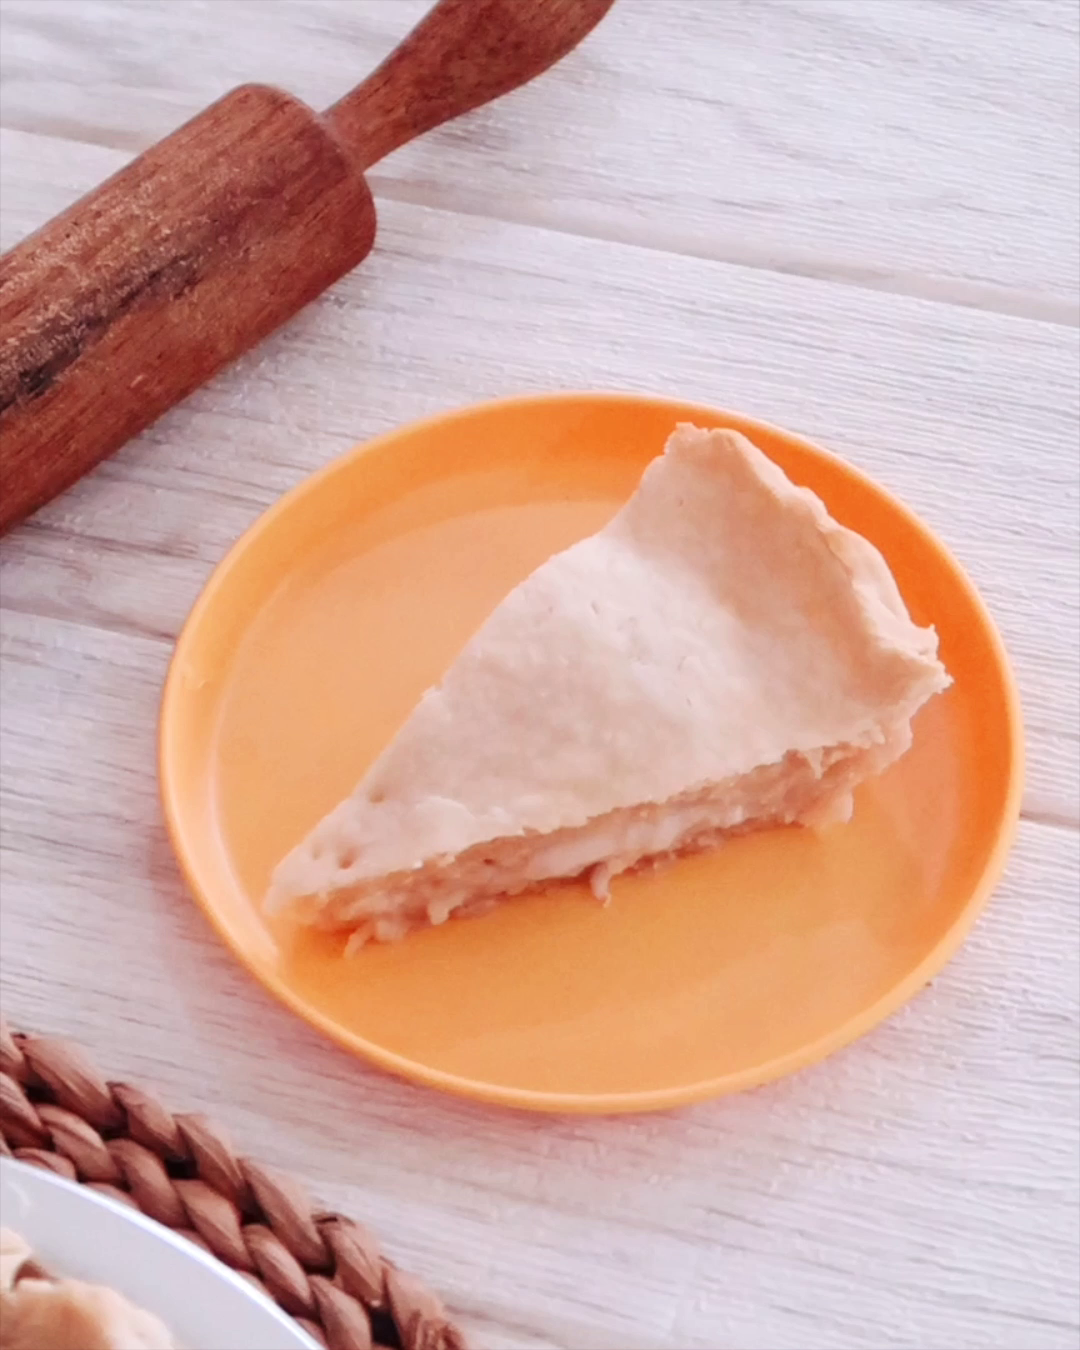 This buko pie is sweet, creamy, and deliciously filling! 🥧